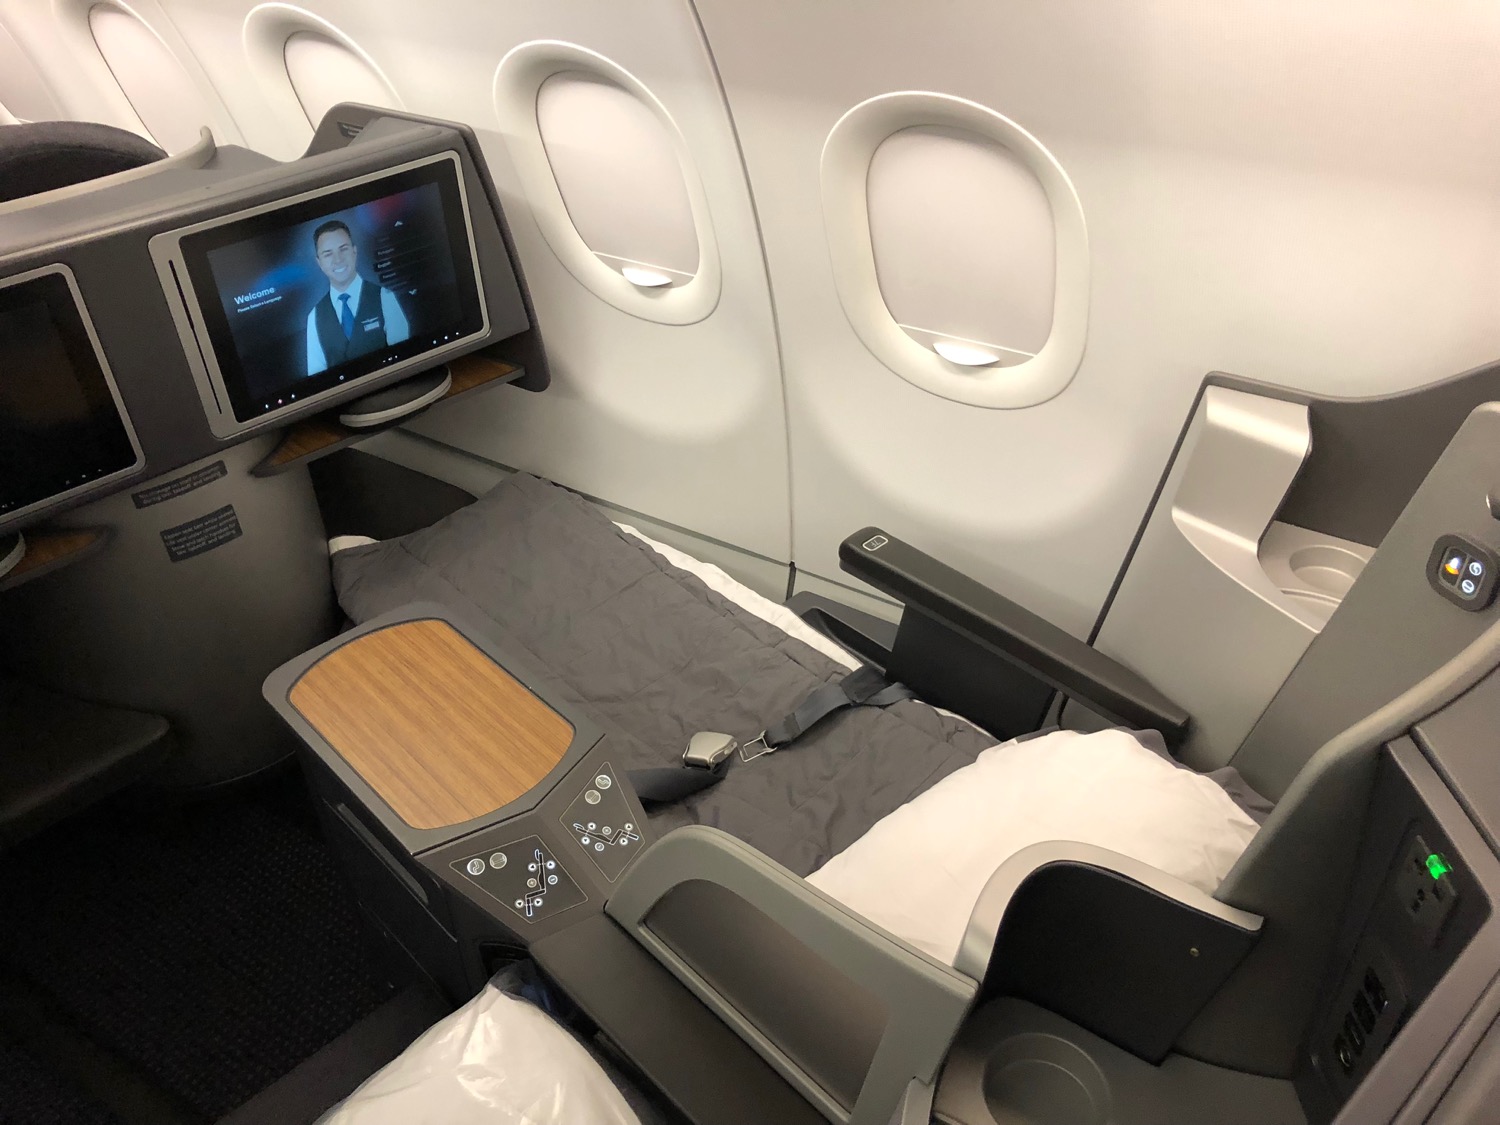 a bed and a tv in an airplane